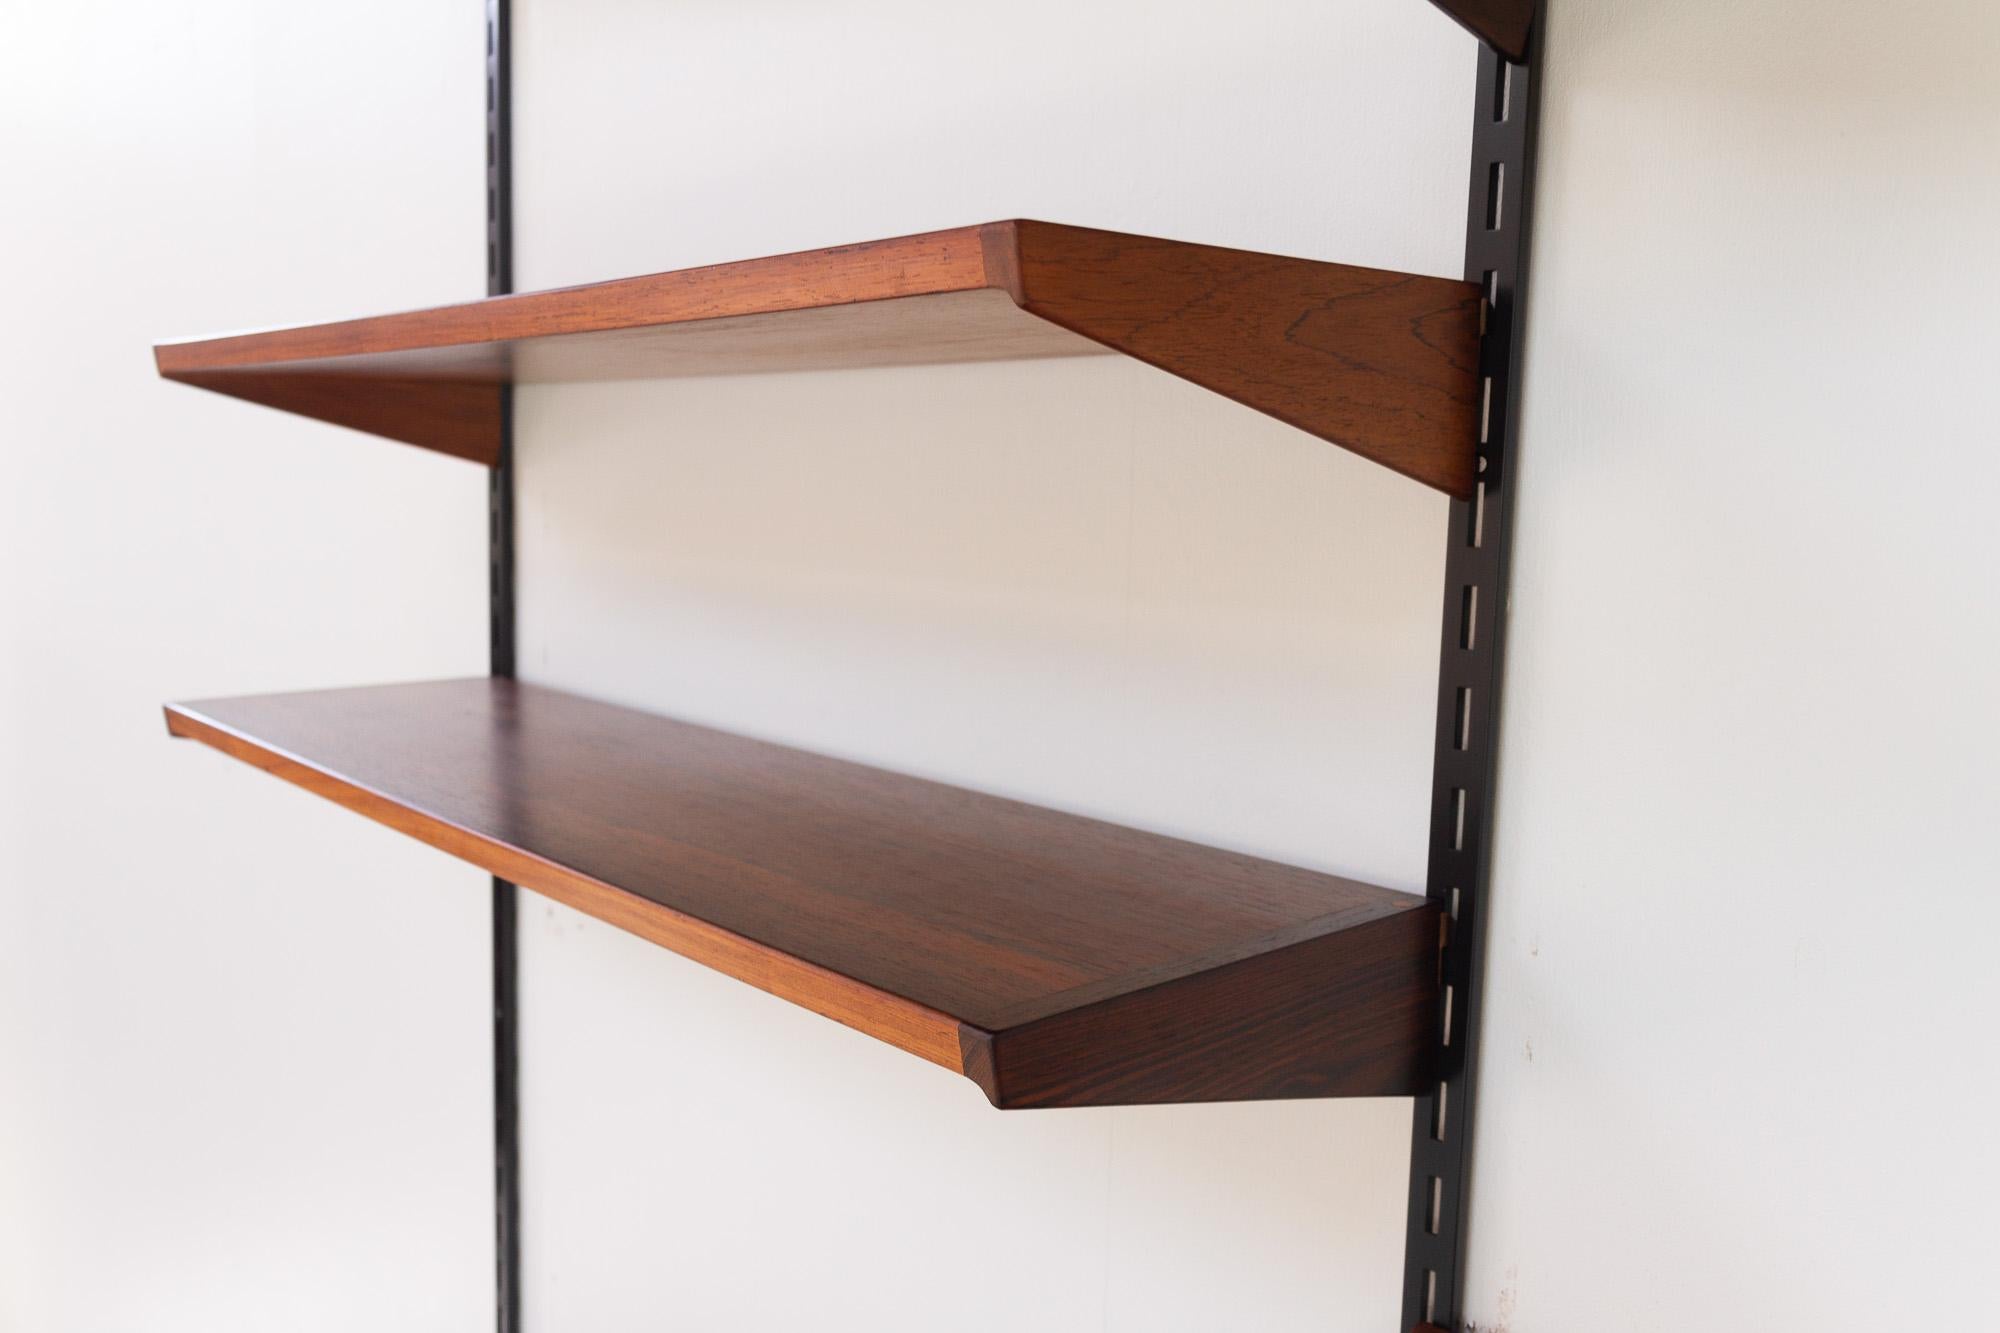 Mid-20th Century Vintage Danish Rosewood Wall Unit by Kai Kristiansen for FM, 1960s